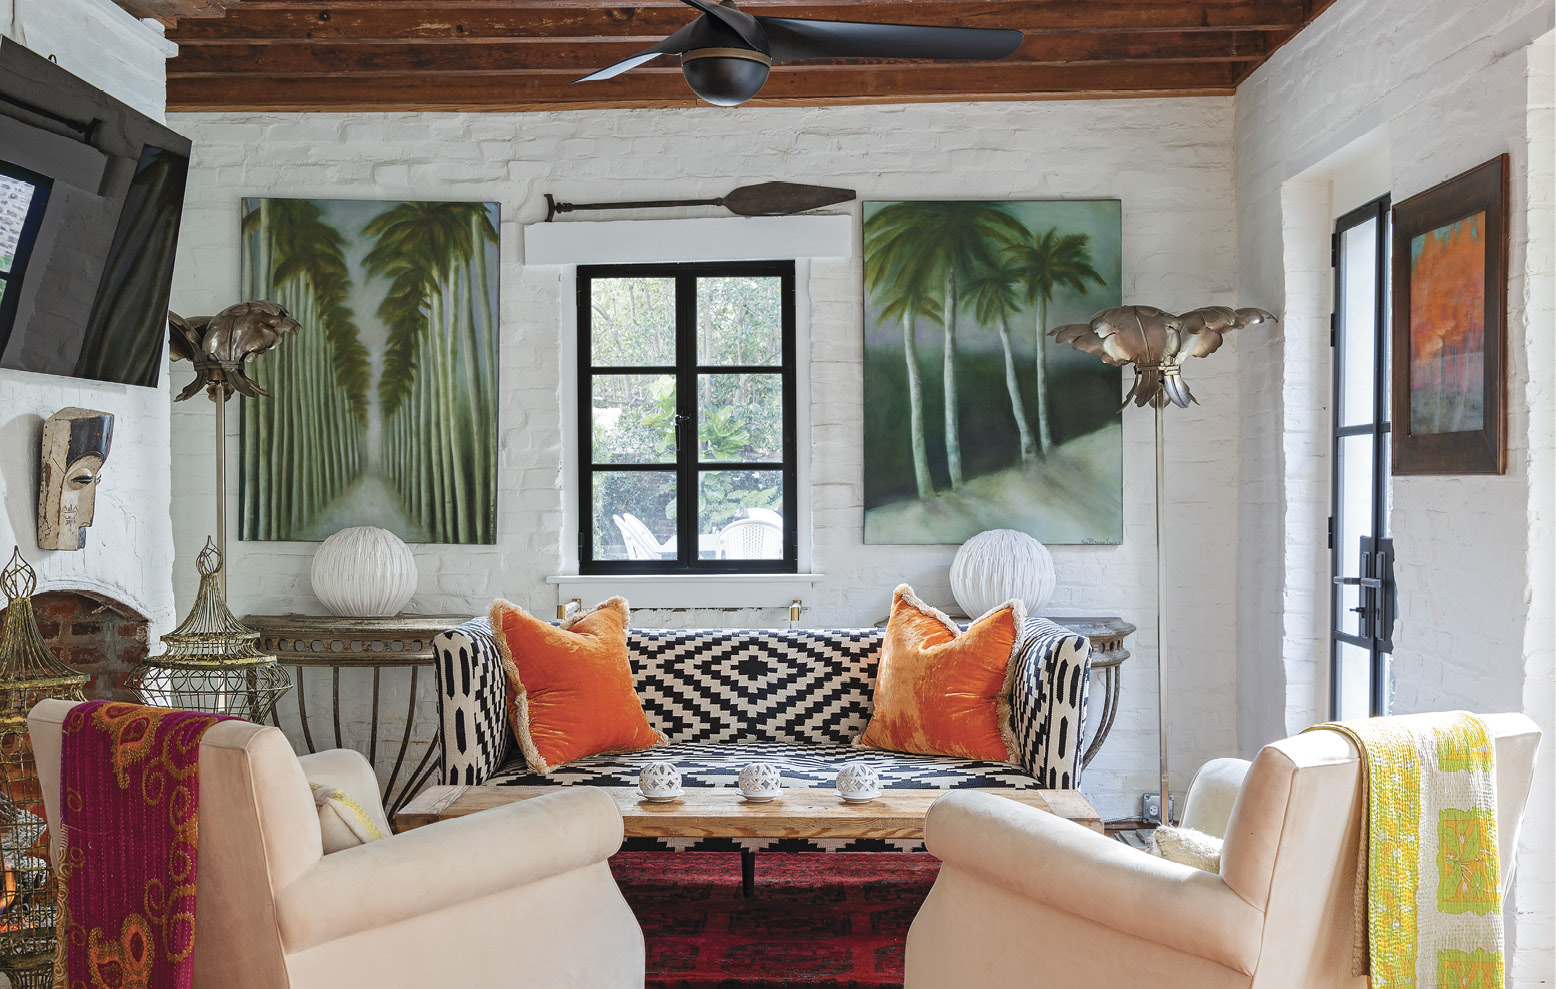 The former kitchen house is now a charming guest suite—and Betsy’s favorite space to watch the morning news. A kilim-upholstered sofa with orange velvet pillows from Fritz Porter lends a Middle Eastern vibe to the cozy cottage, while palm trees painted by Betsy mimic the vintage floor lamps.